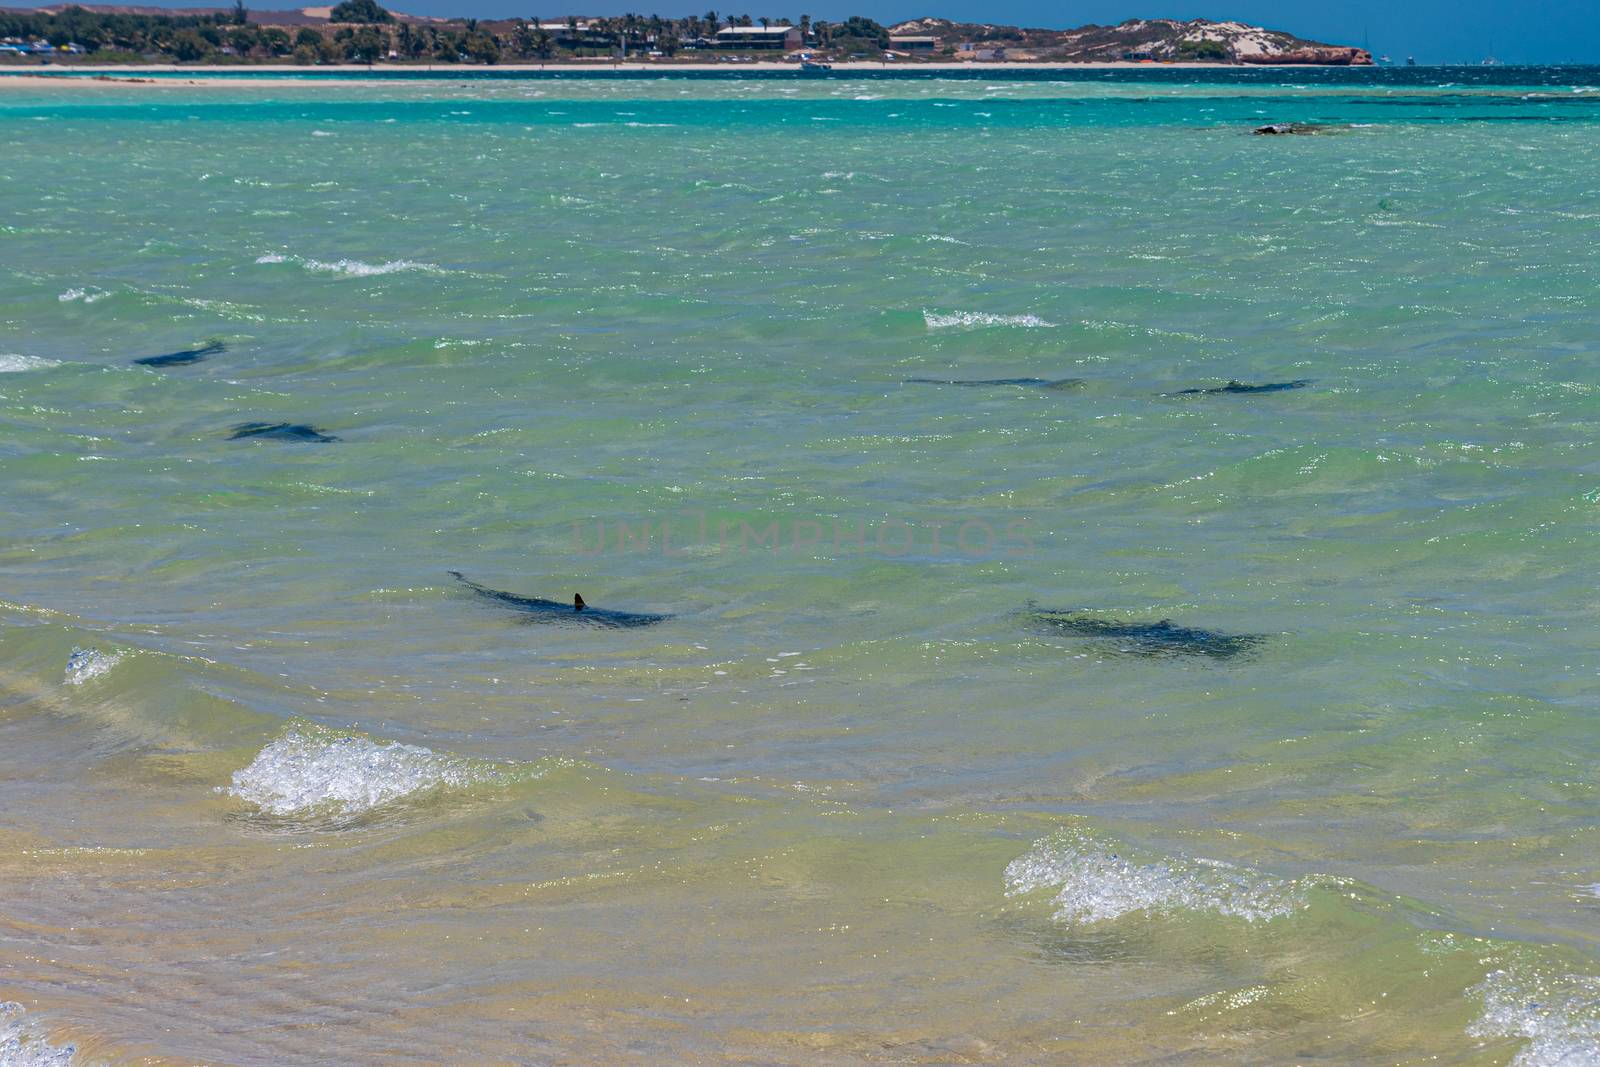 Reef sharks swimming along the beach close to Coral Bay Australia